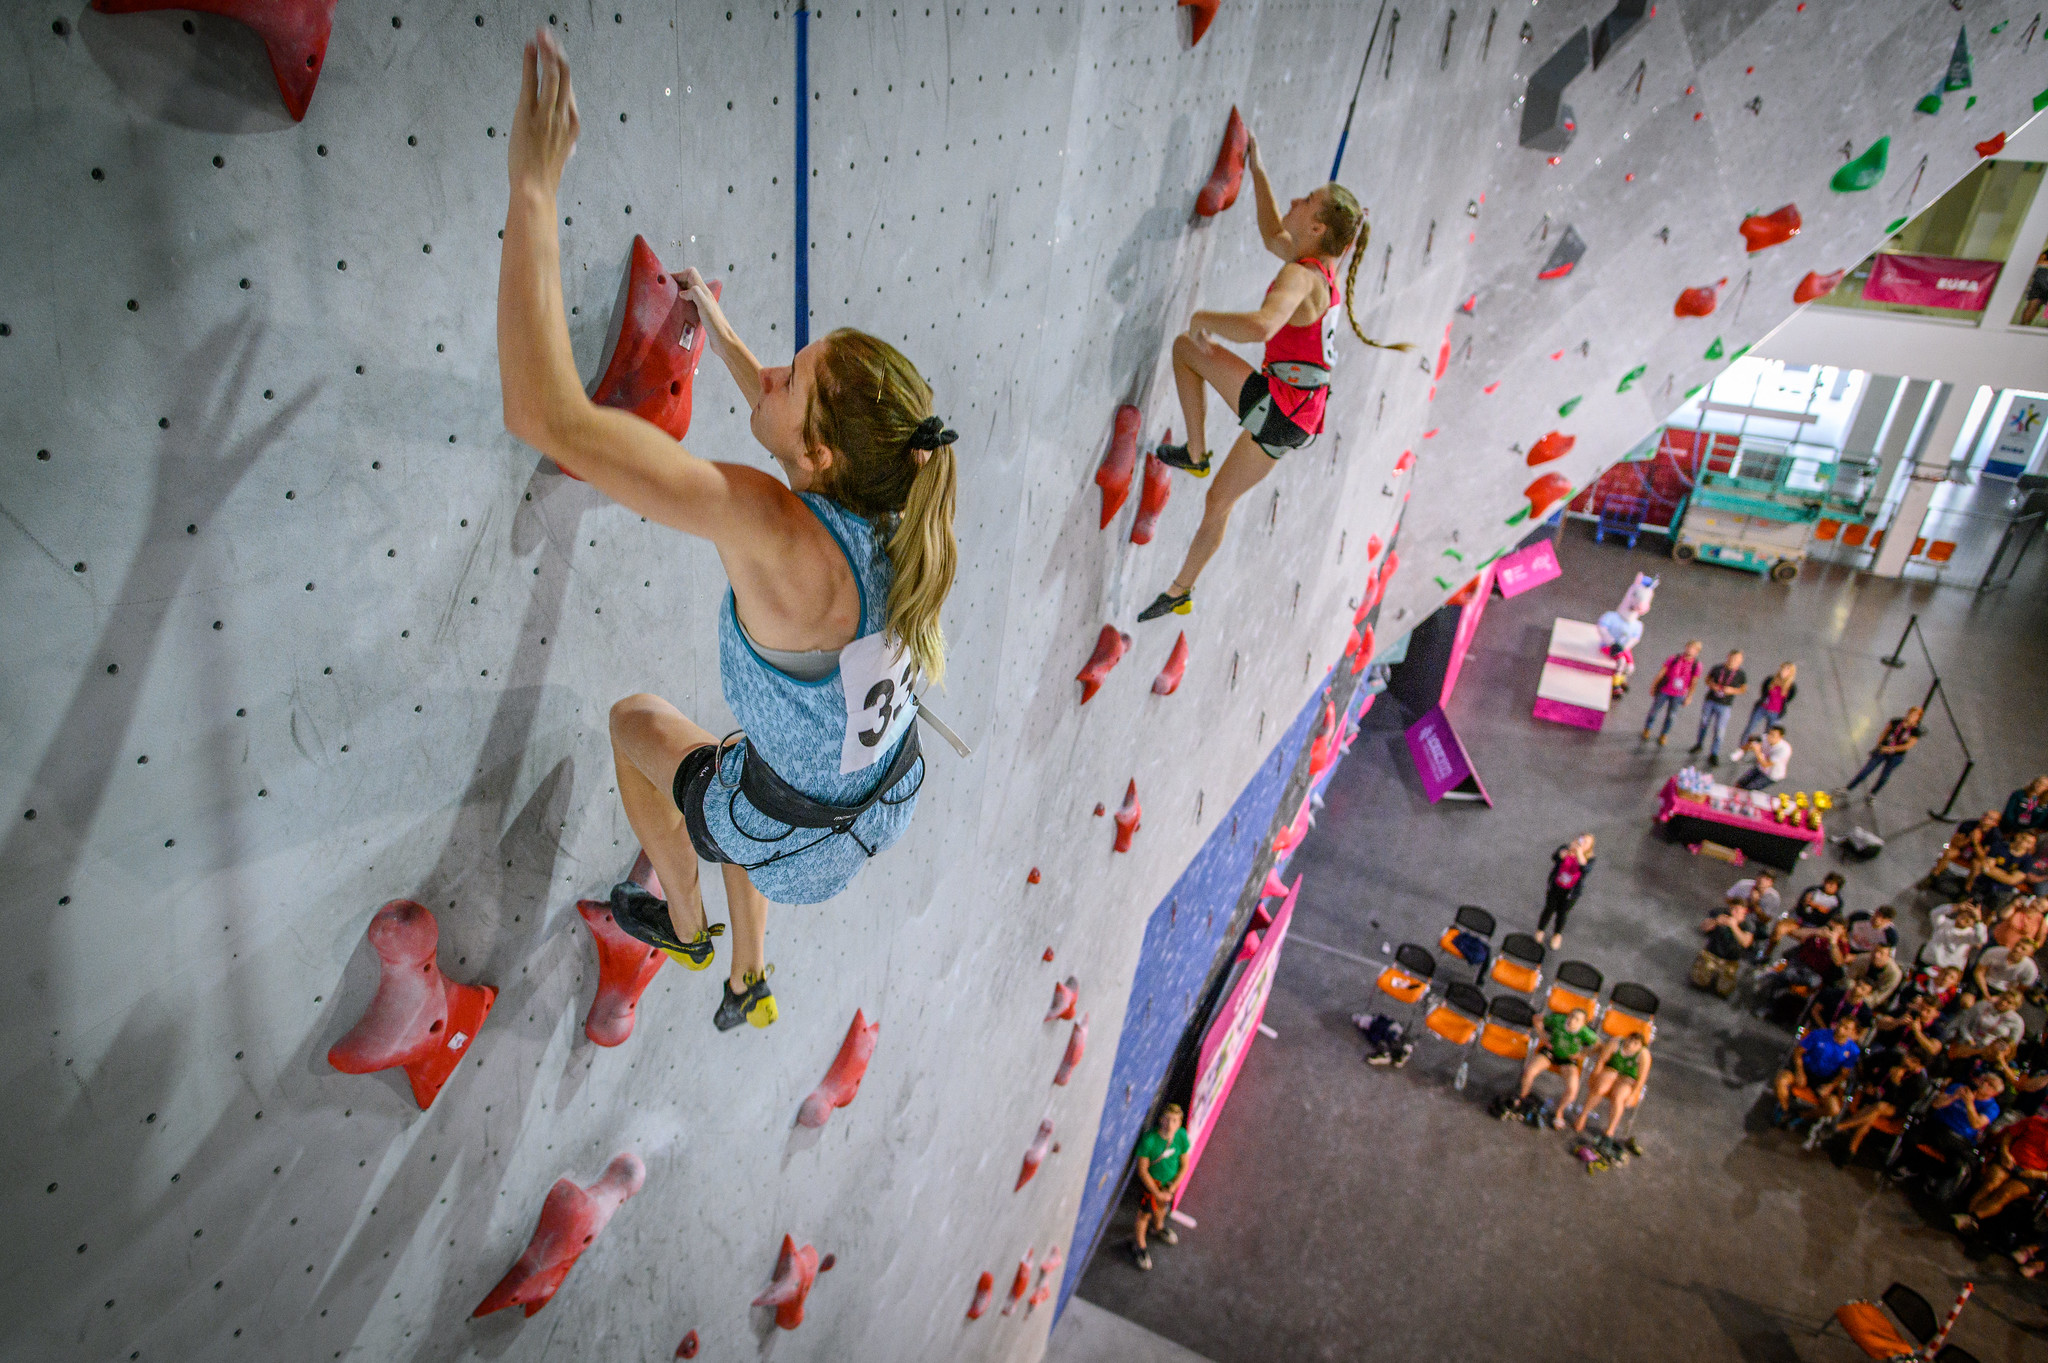 Day 15 - Sport Climbing (Speed + Medal Ceremony)